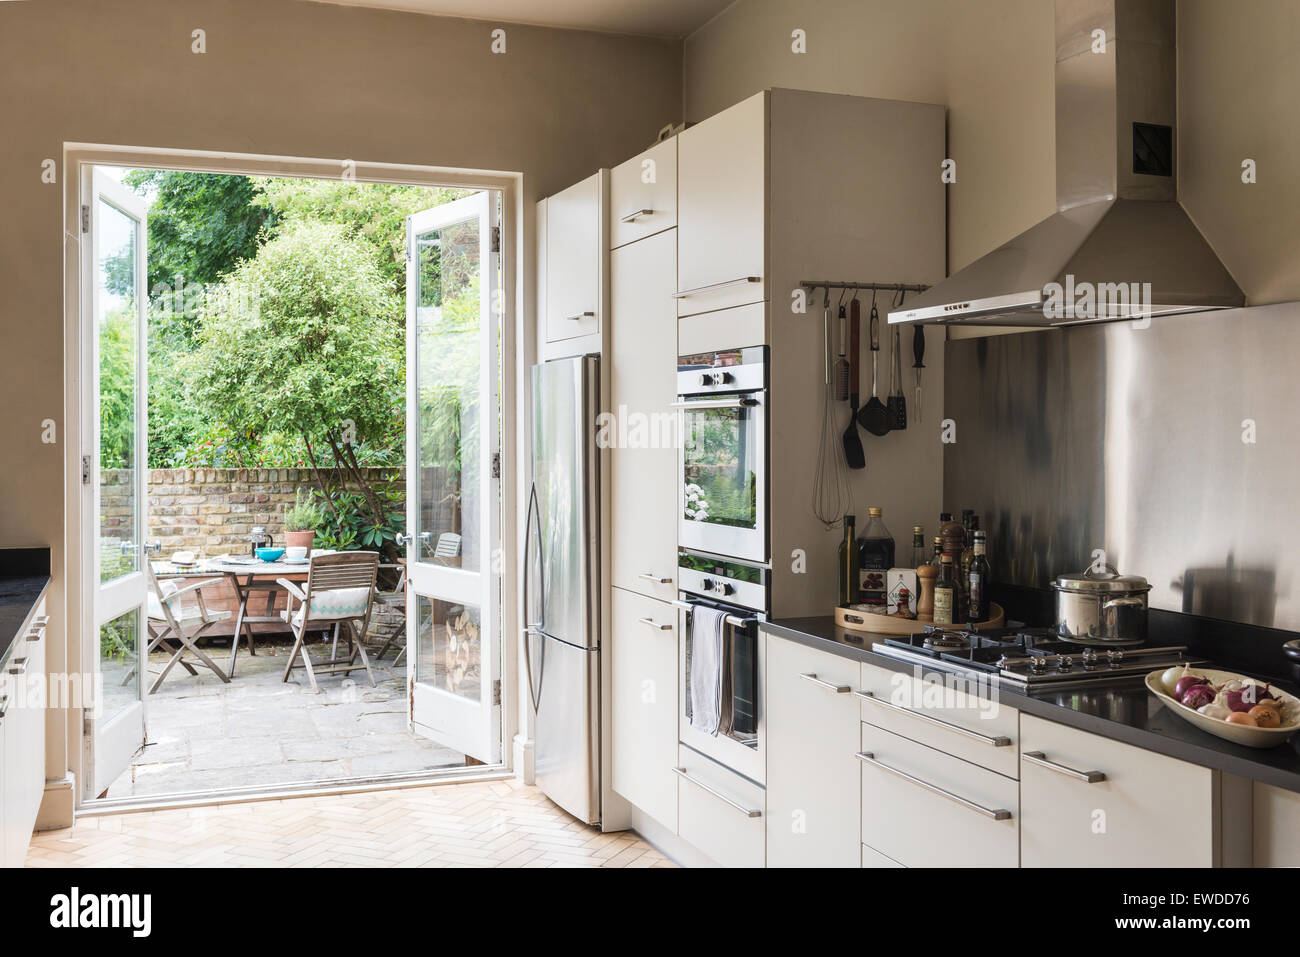 French windows open onto garden from kitchen area with stainless steel appliances and granite work surfaces Stock Photo